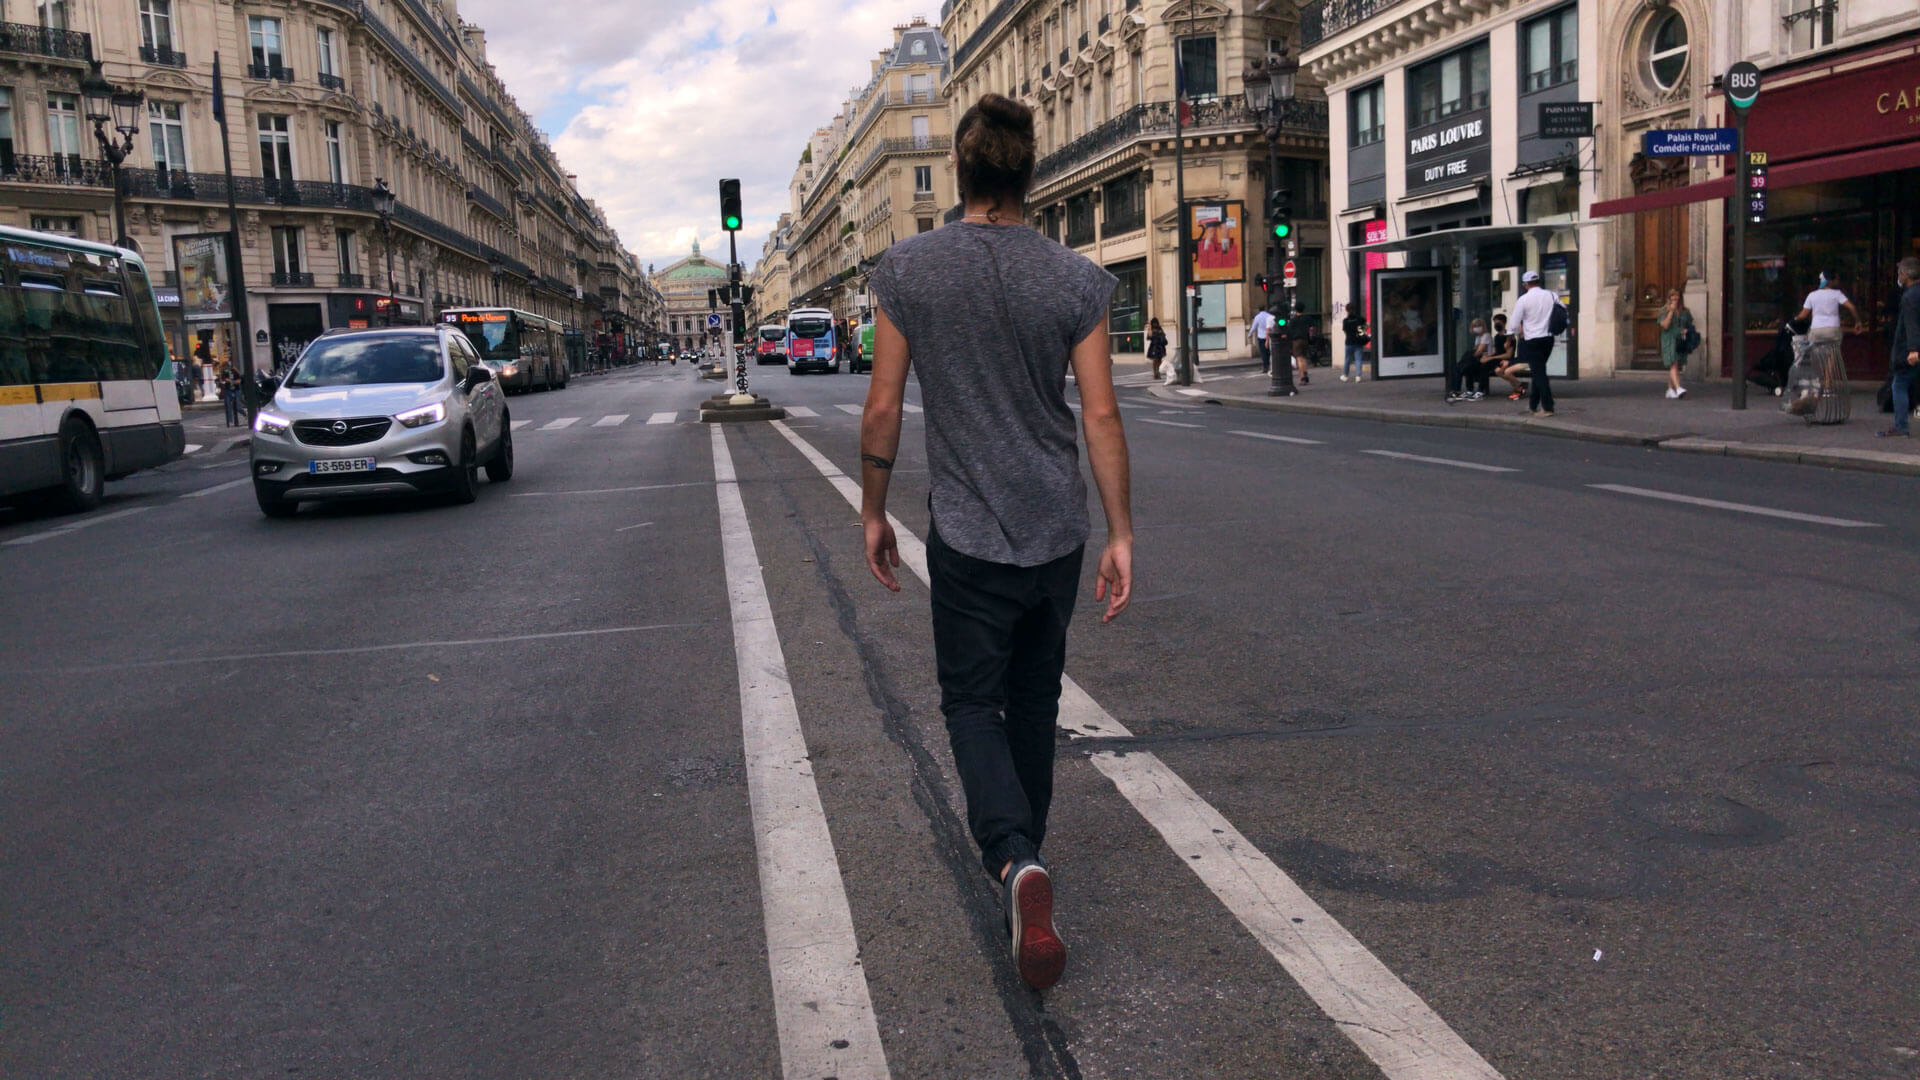 A man walks between two narrow white lines in the middle of a city street. He is wearing a grey shirt and black pants with his hair pulled in a high bun. His back is towards the camera, and to his left is a car and bus passing by.